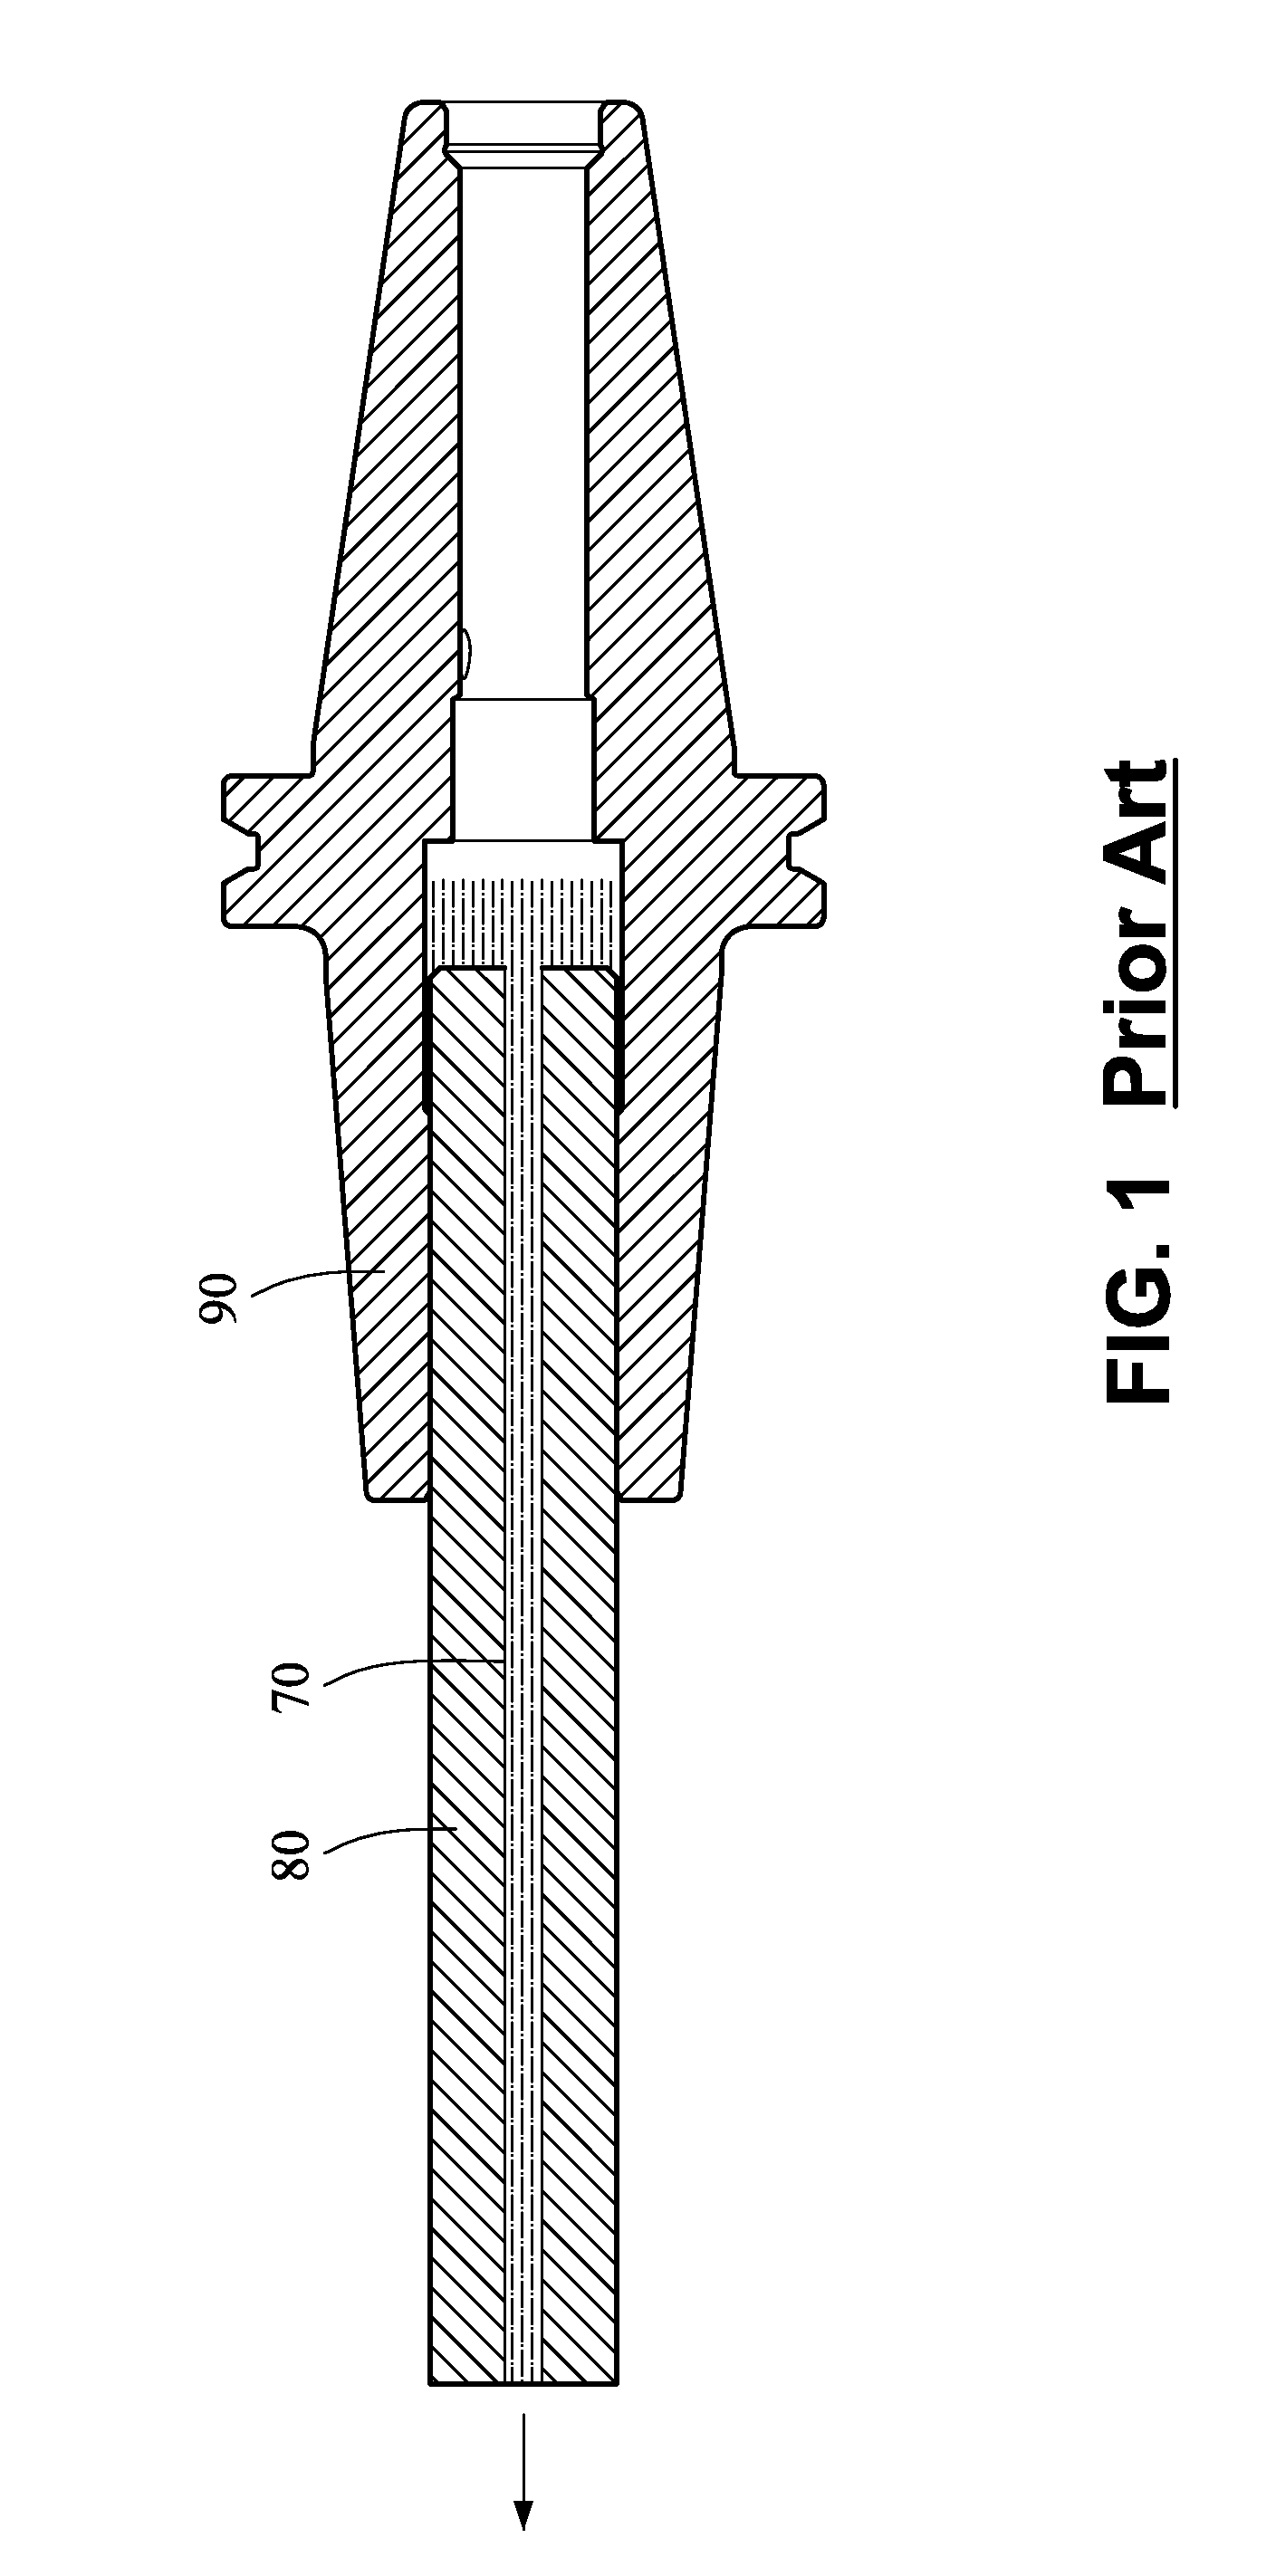 Blade fastening device having cuttign fluid guide grooves on a blade